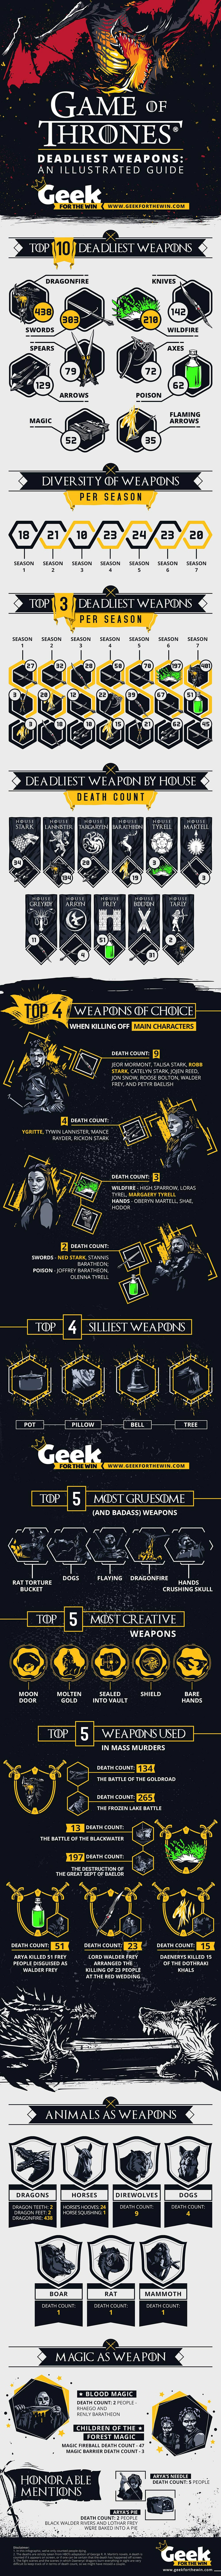 Game of Thrones: Deadliest Weapons - An Illustrated Guide